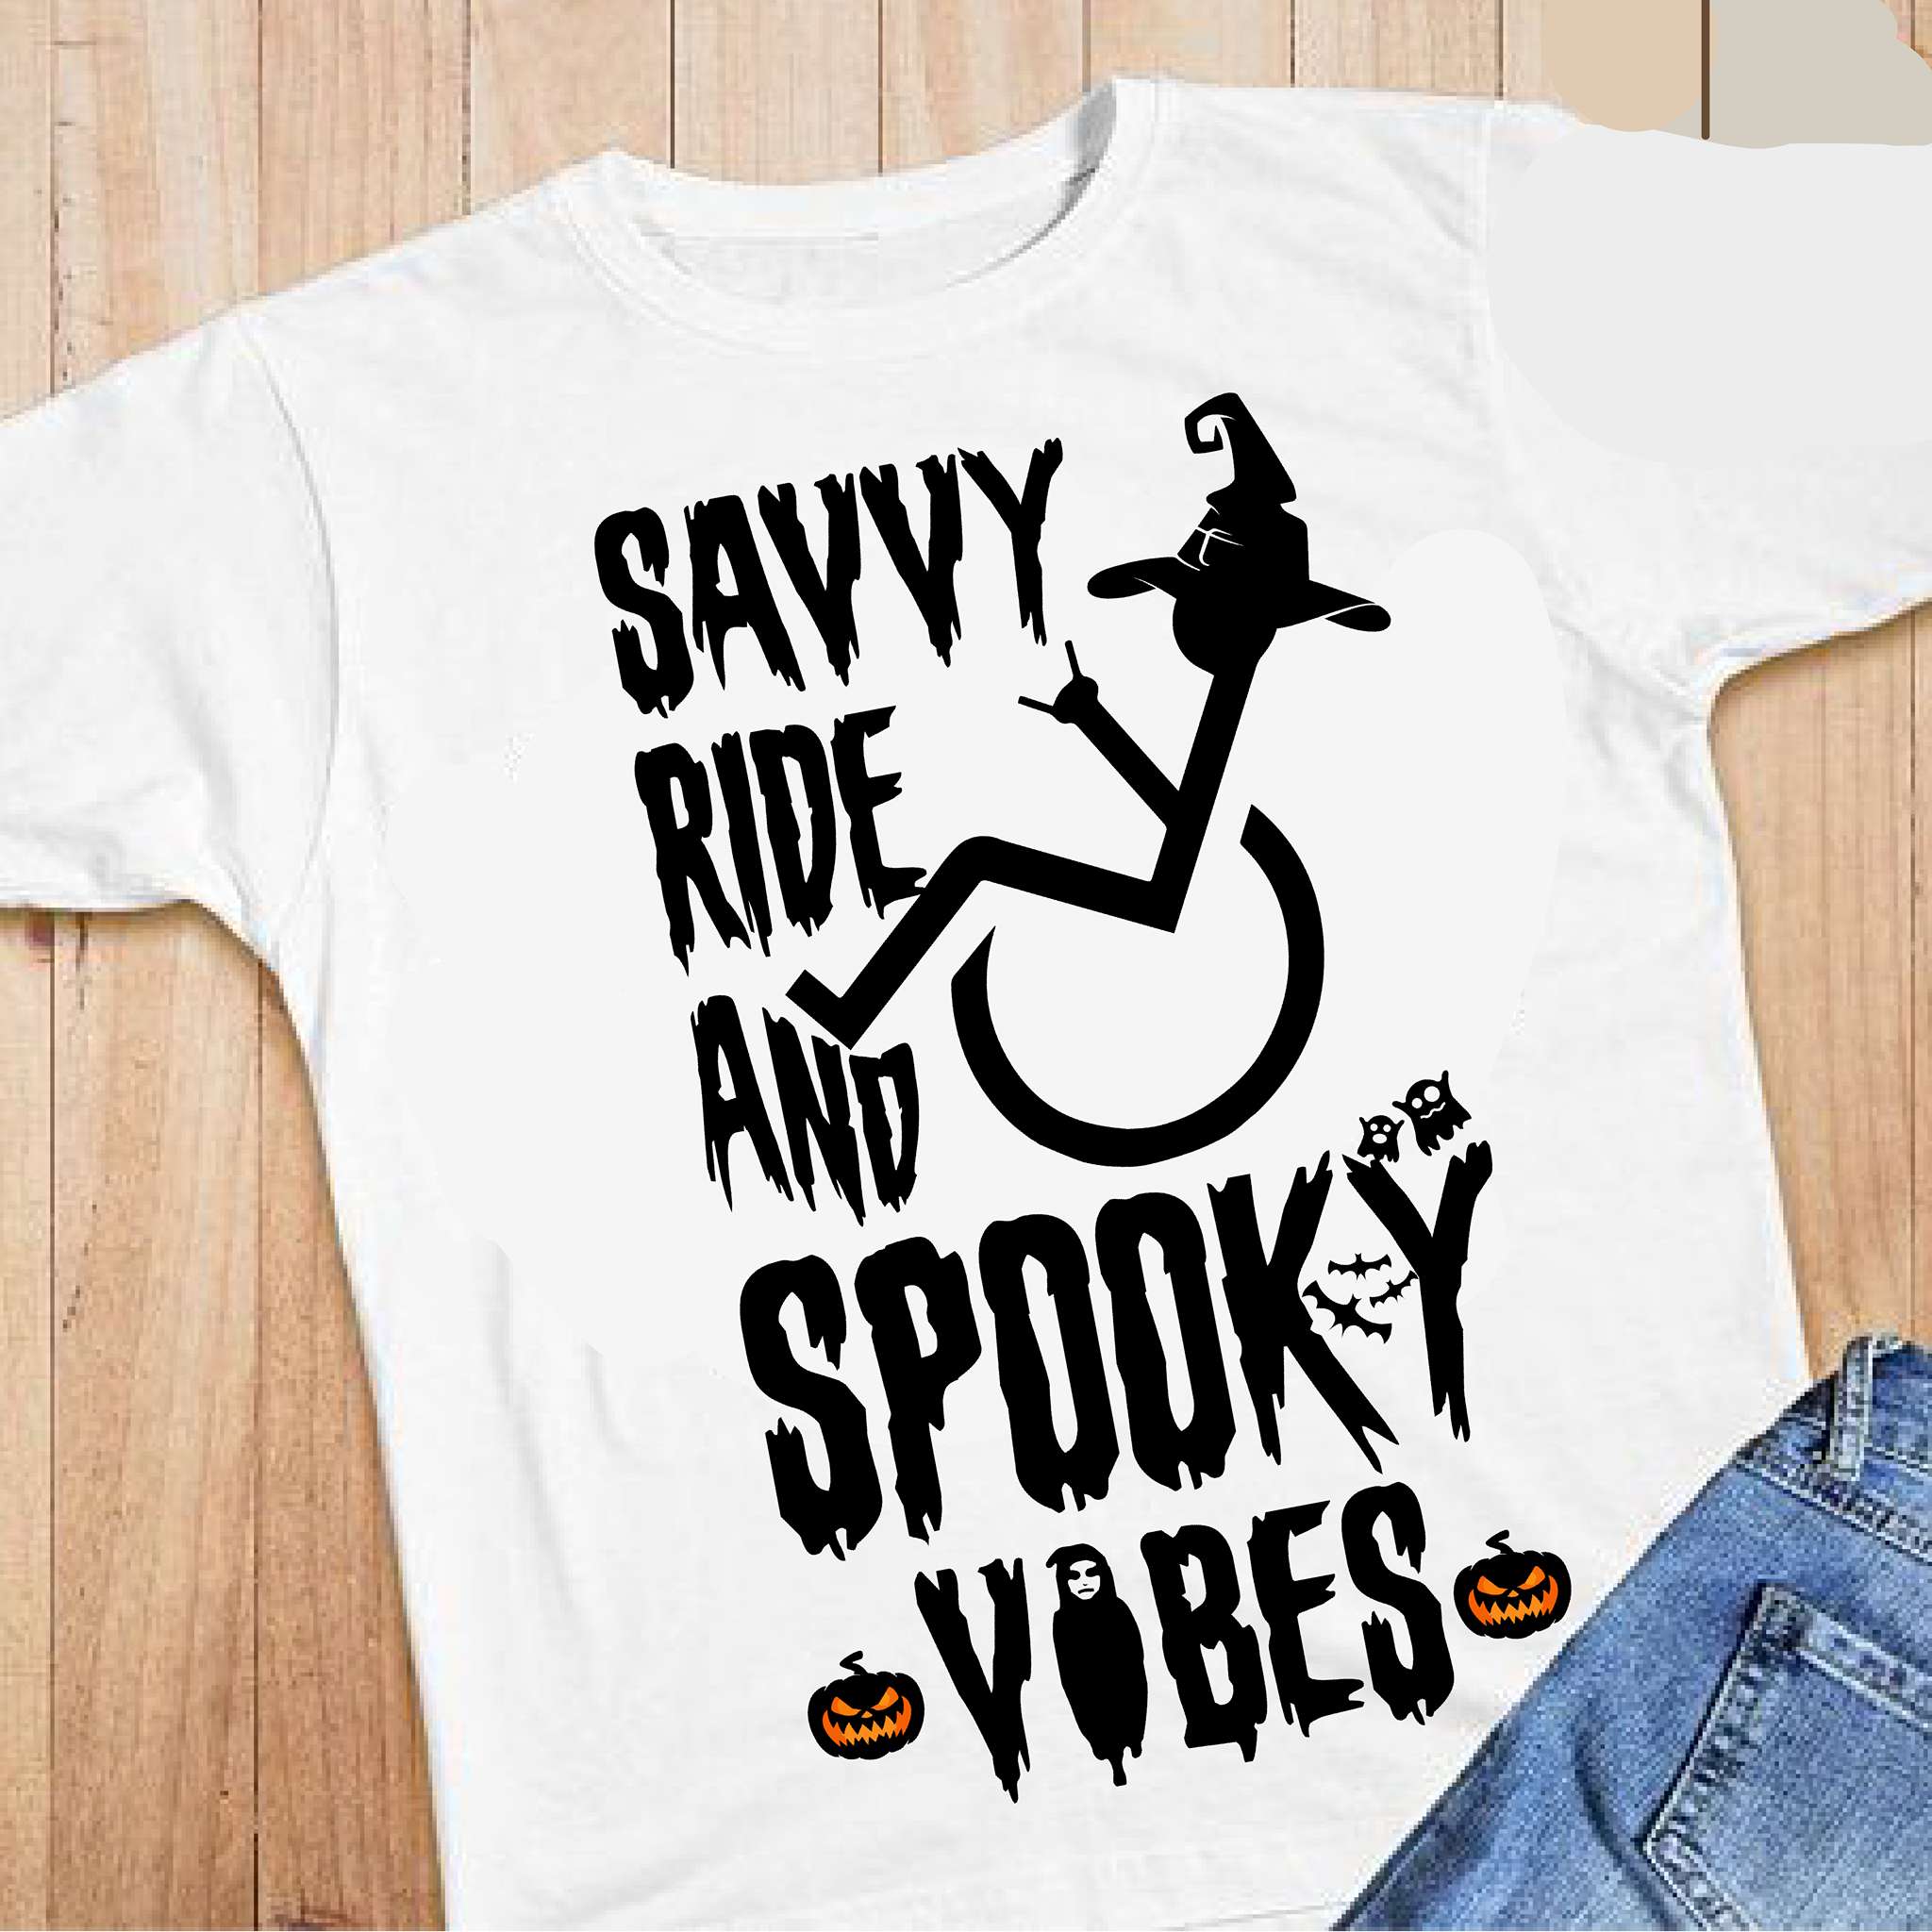 Savvy ride and spooky vibes